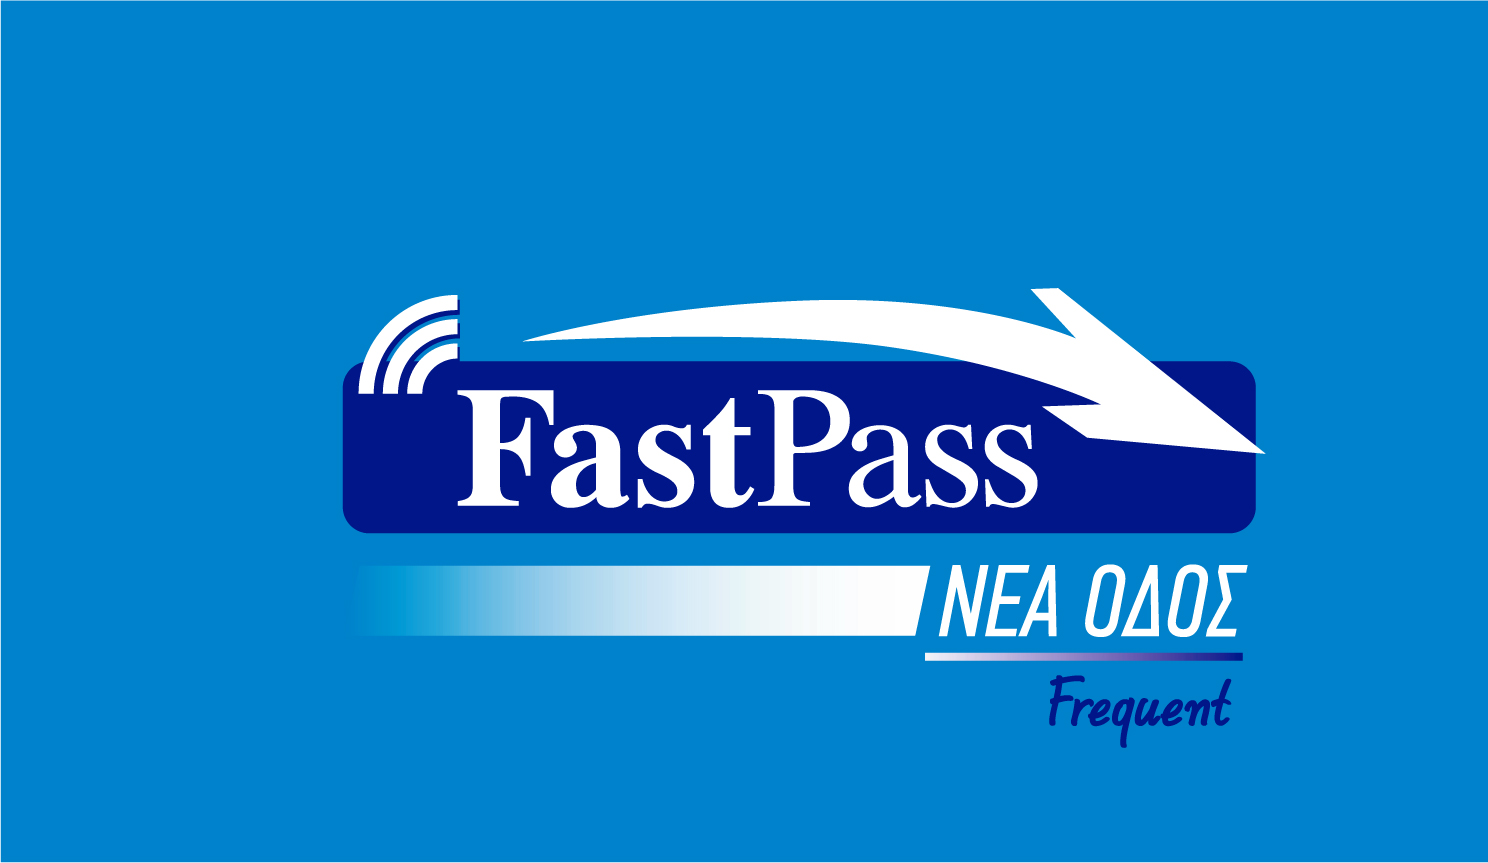 fast pass nea odos greek Frequent 01